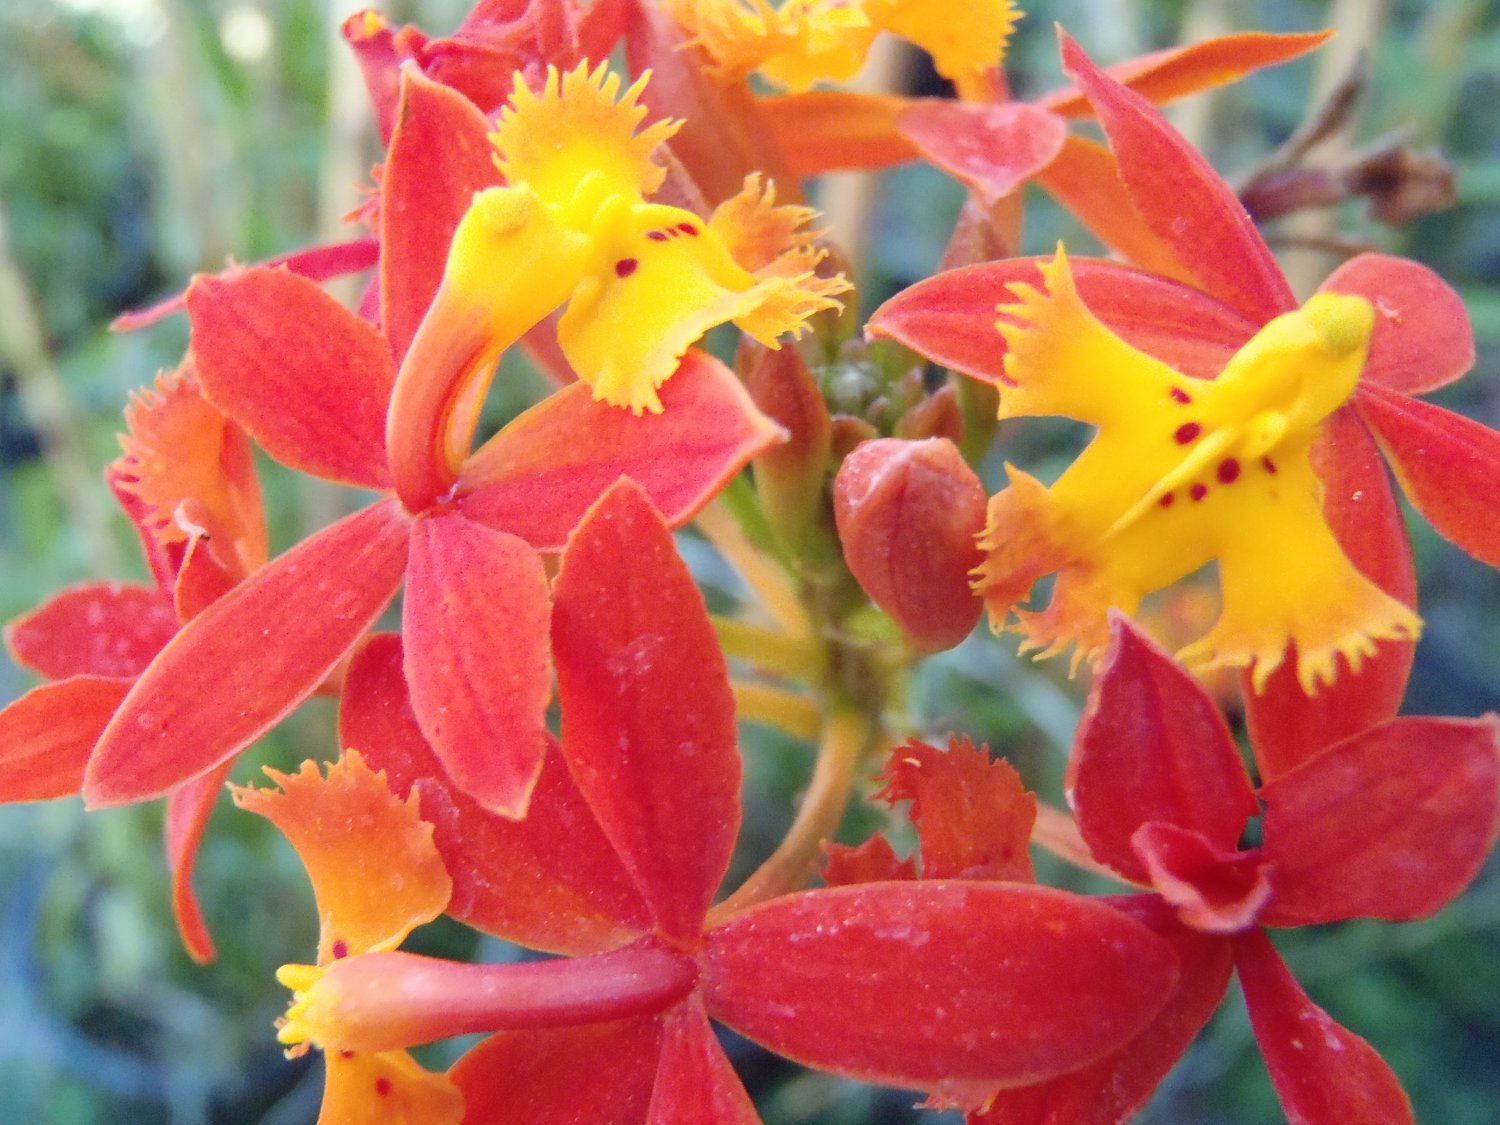 Everblooming Rare Crucifix Orchid- Epidendrum Radicans